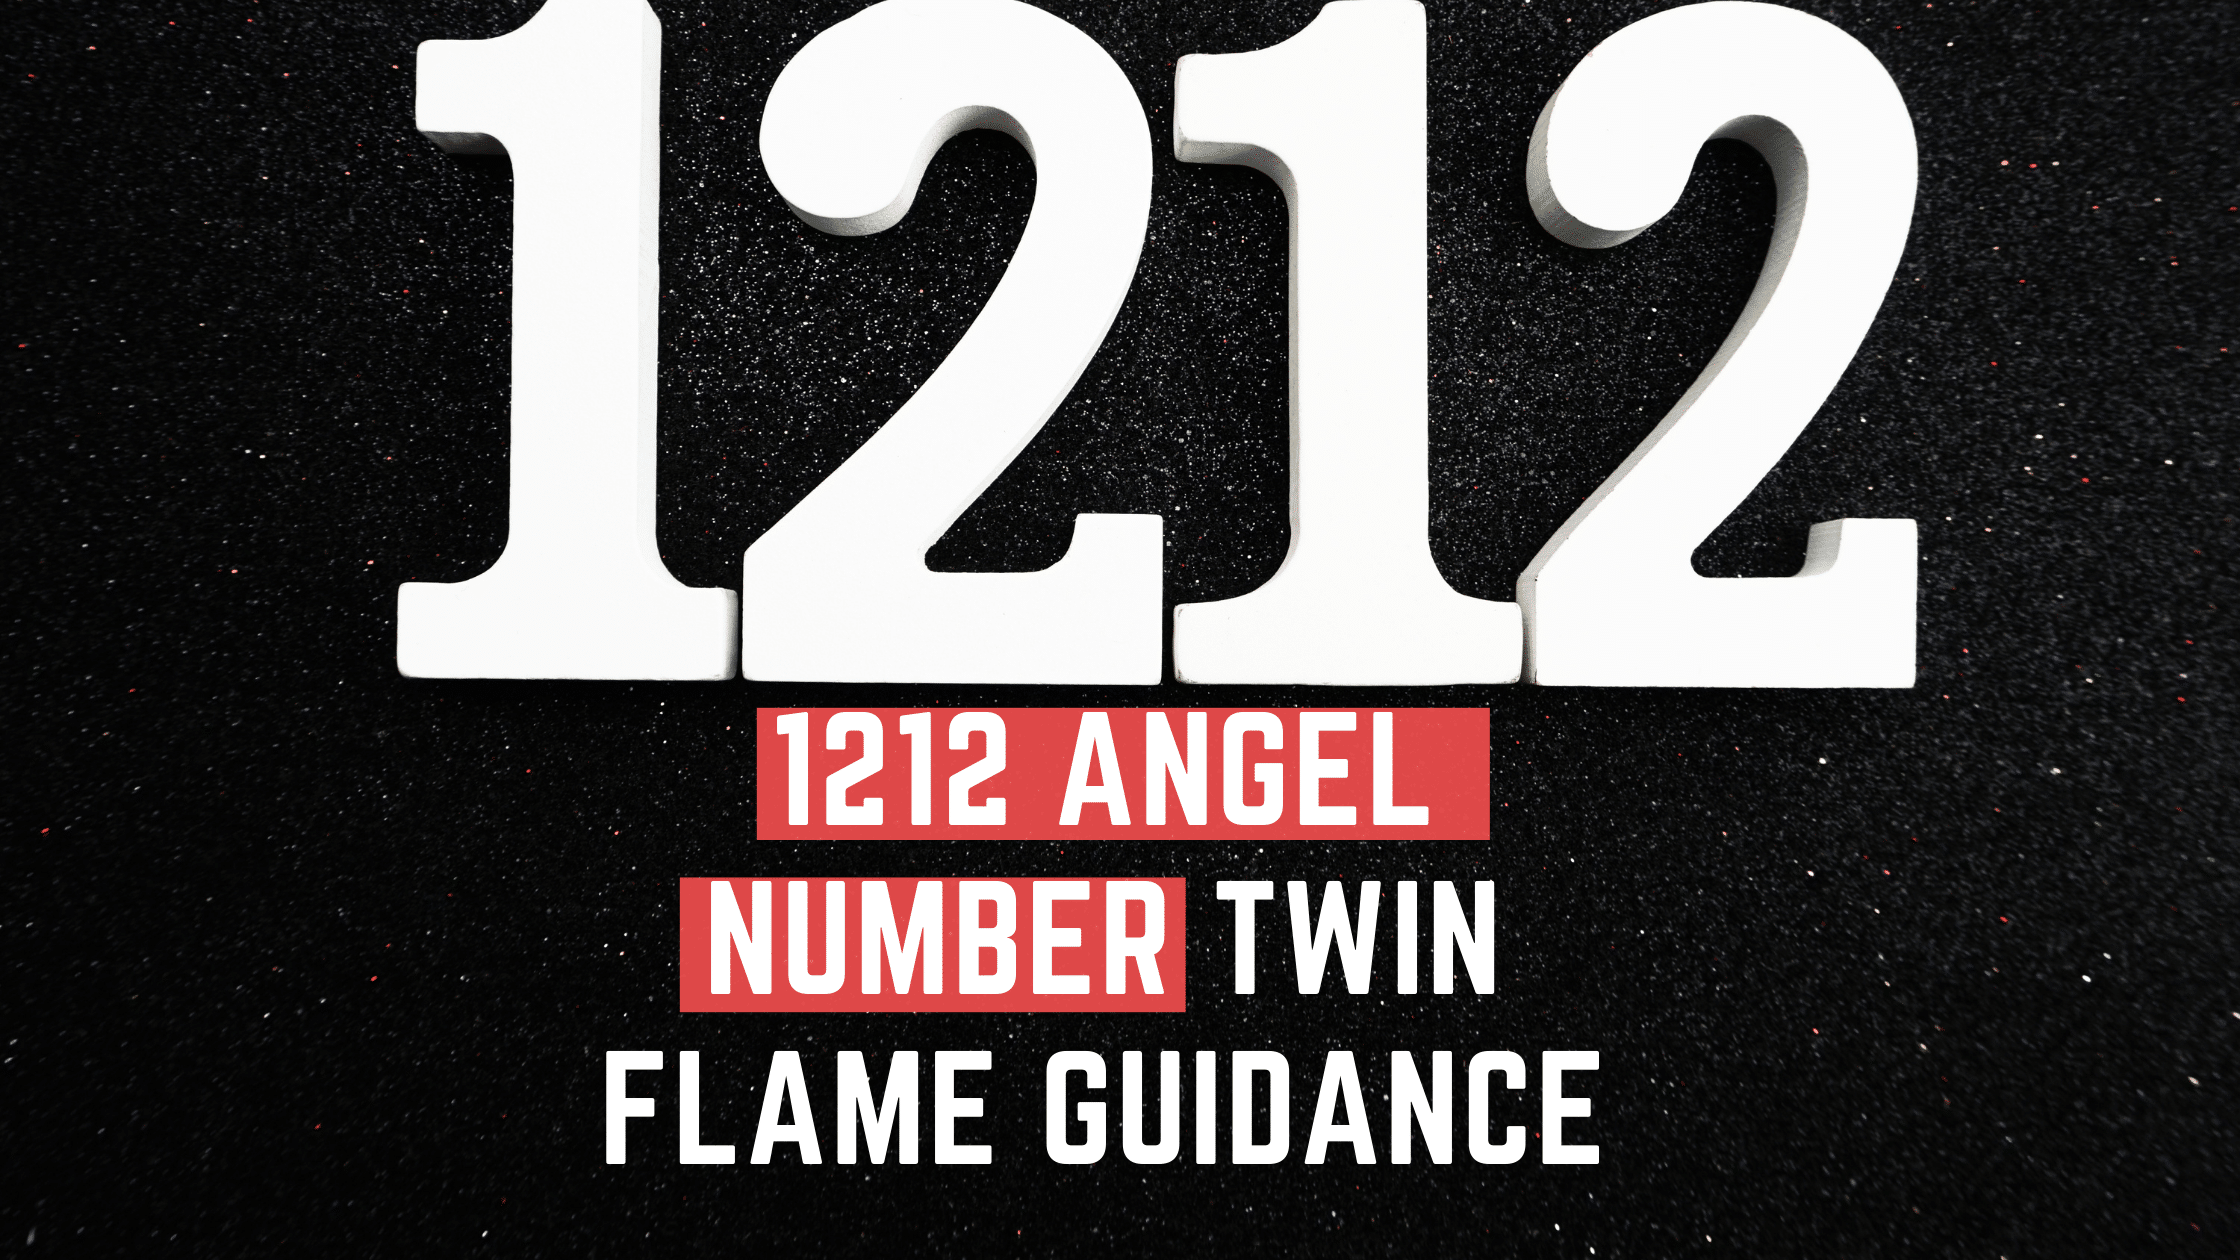 96 angel number twin flame